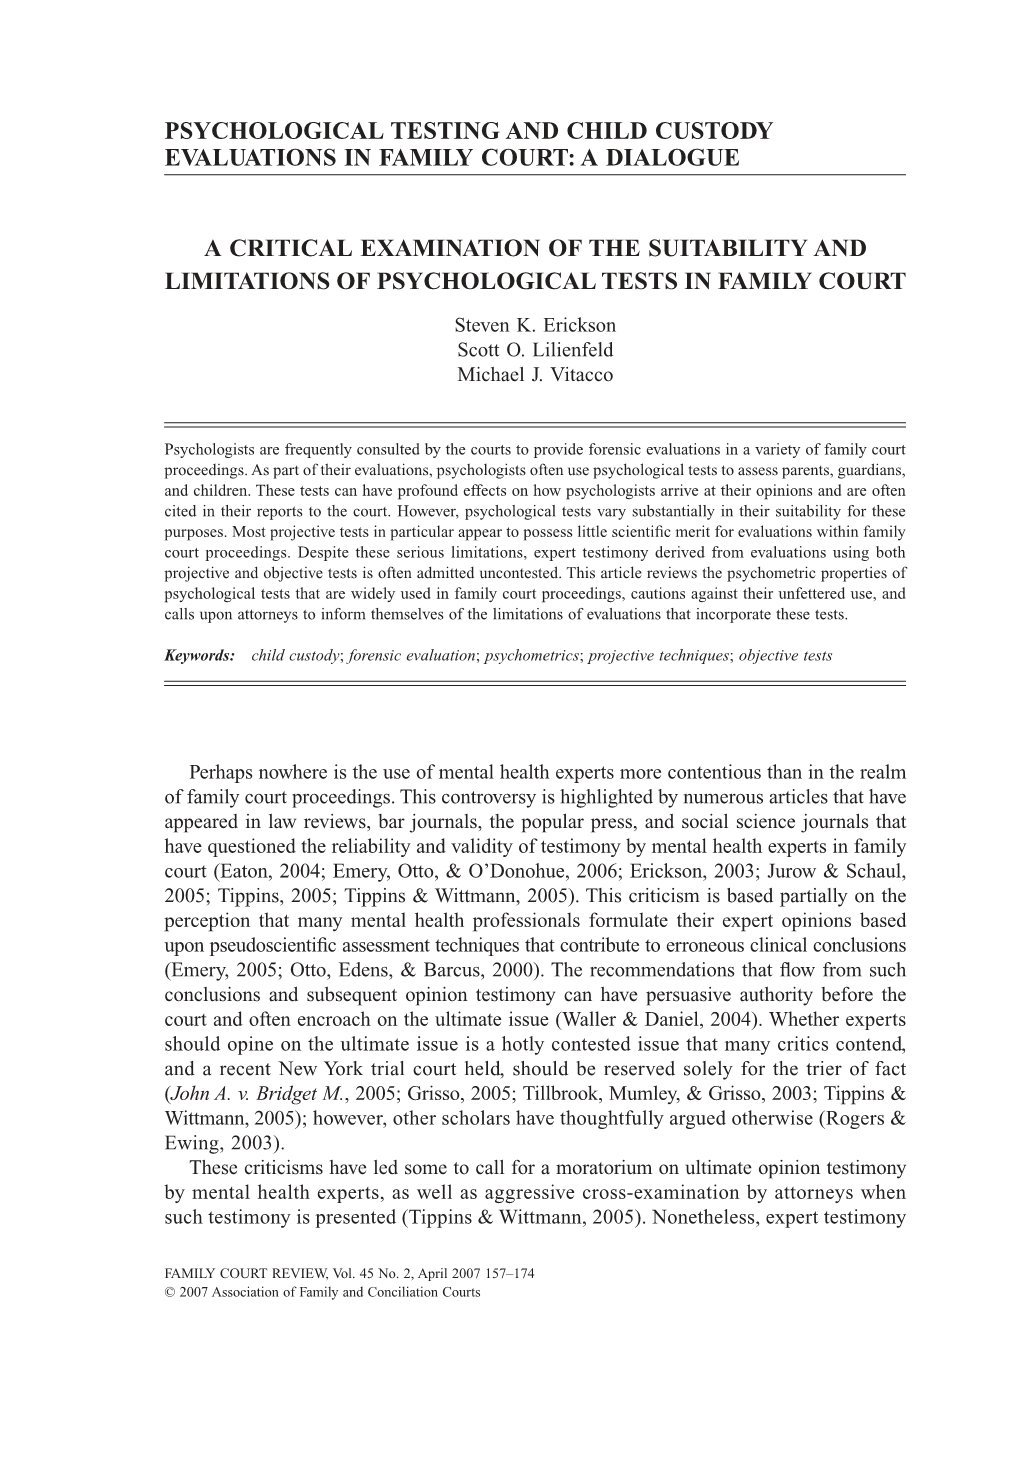 A Critical Examination of the Suitability and Limitations of Psychological Tests in Family Court